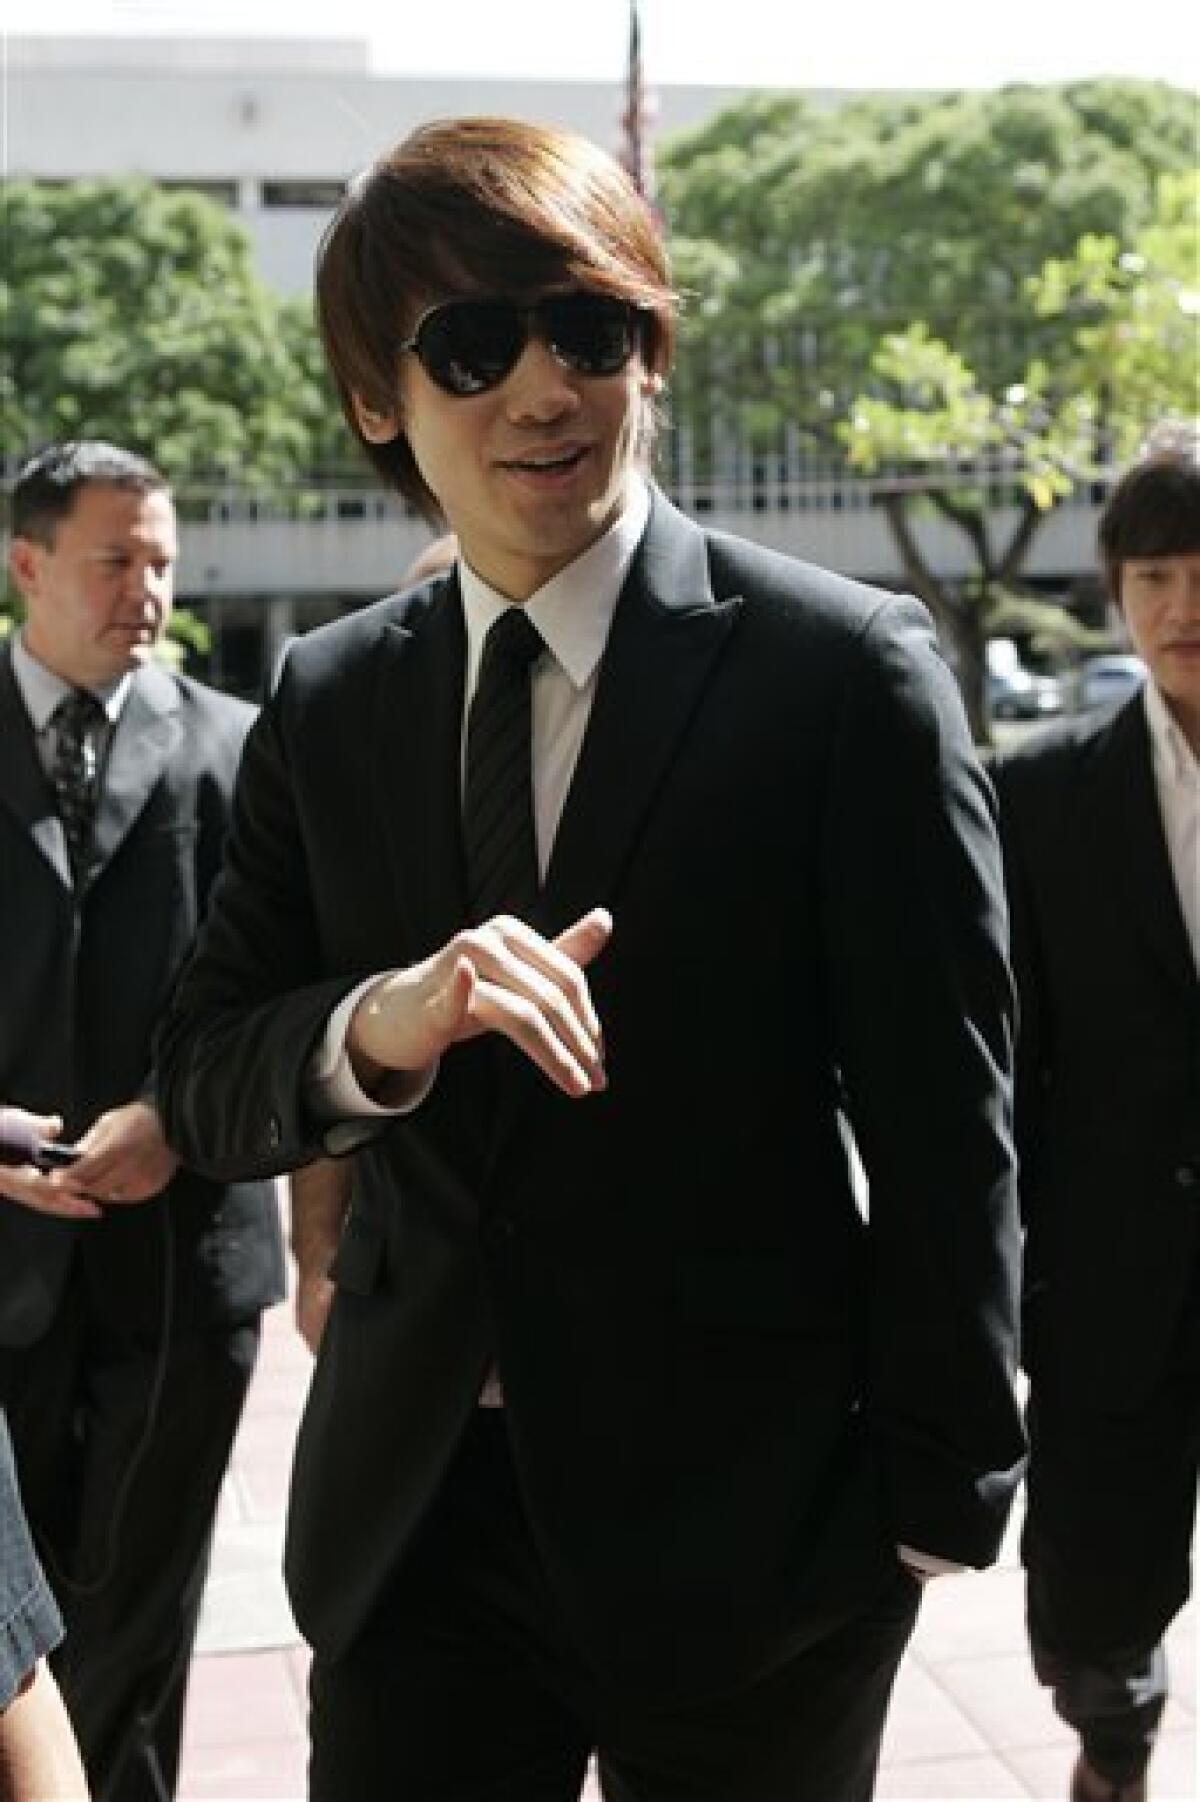 South Korean pop star and actor Rain, 26, flashes a Hawaiian "shaka" sign as he arrives at federal court, Monday, March 16, 2009, in Honolulu. Rain, whose real name is Jung Ji-hoon, and his producers are being sued over the performer's abrupt cancellation of a June 2007 concert in Honolulu. Rain is expected to testify. (AP Photo/Marco Garcia)